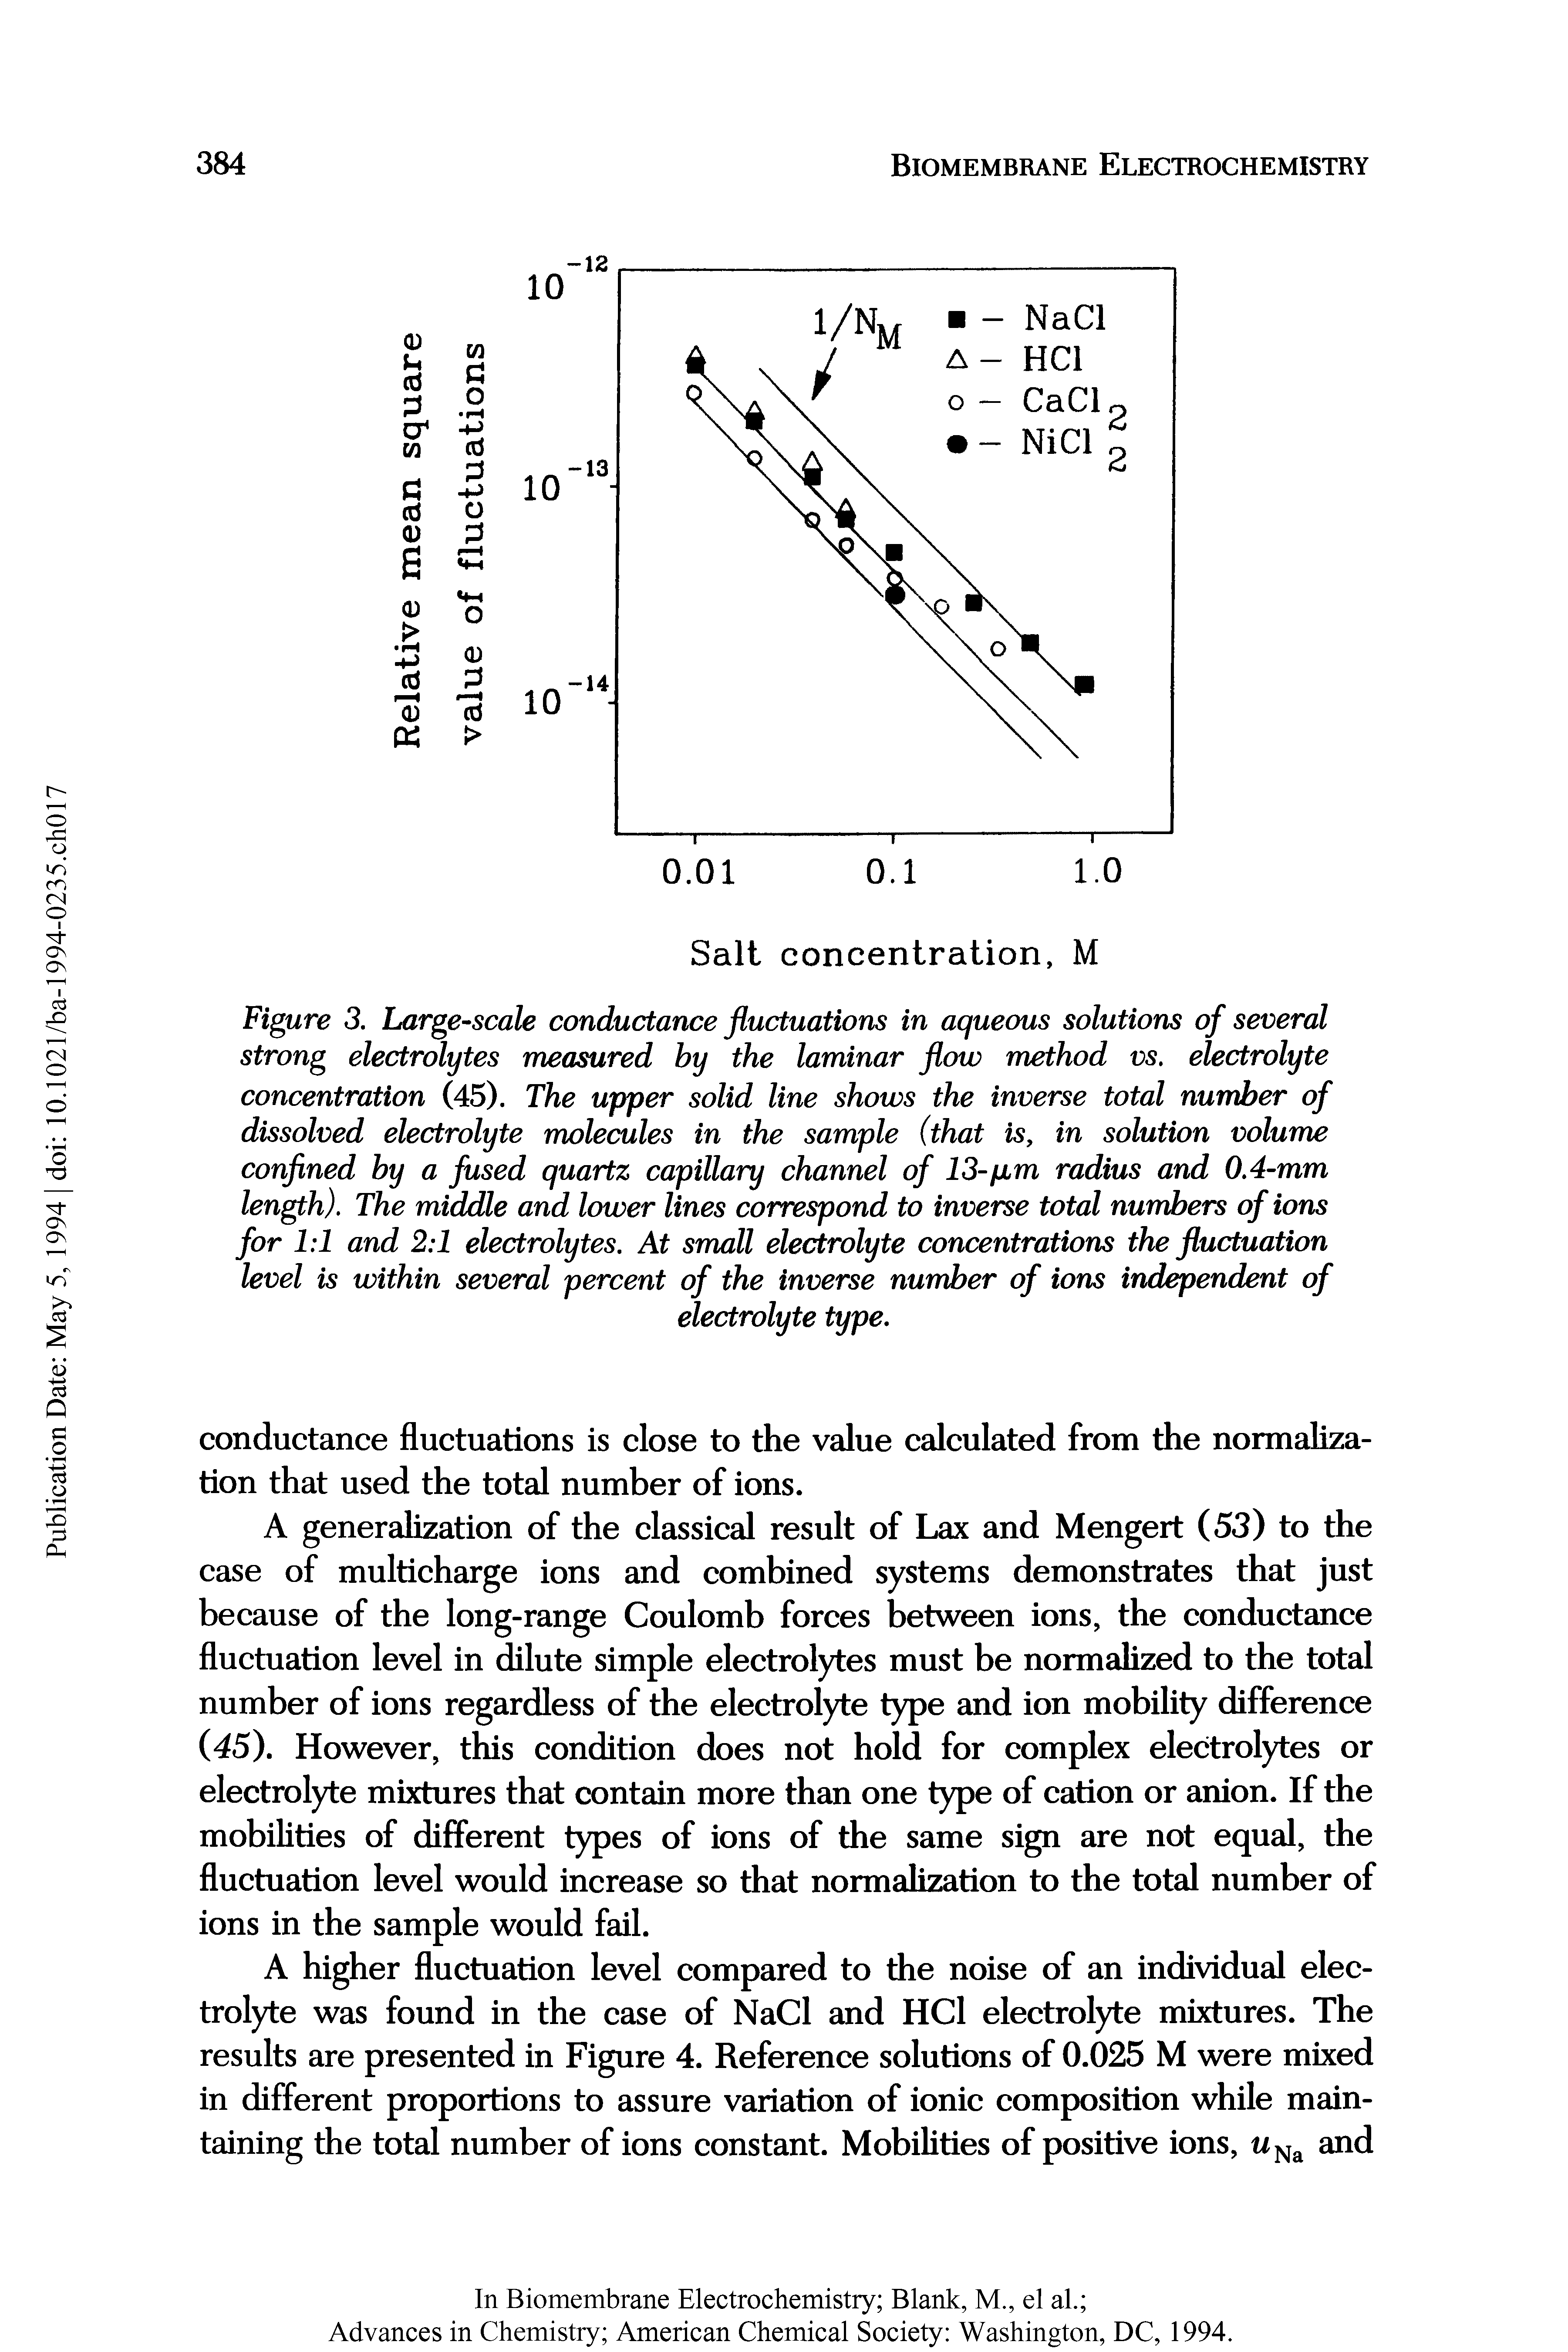 Figure 3. Large-scale conductance fluctuations in aqueous solutions of several strong electrolytes measured by the laminar flow method vs. electrolyte concentration (45). The upper solid line shows the inverse total number of dissolved electrolyte molecules in the sample (that is, in solution volume confined by a fused quartz capillary channel of 13-pm radius and 0.4-mm length). The middle and lower lines correspond to inverse total numbers of ions for 1 1 and 2 1 electrolytes. At small electrolyte concentrations the fluctuation level is within several percent of the inverse number of ions independent of...